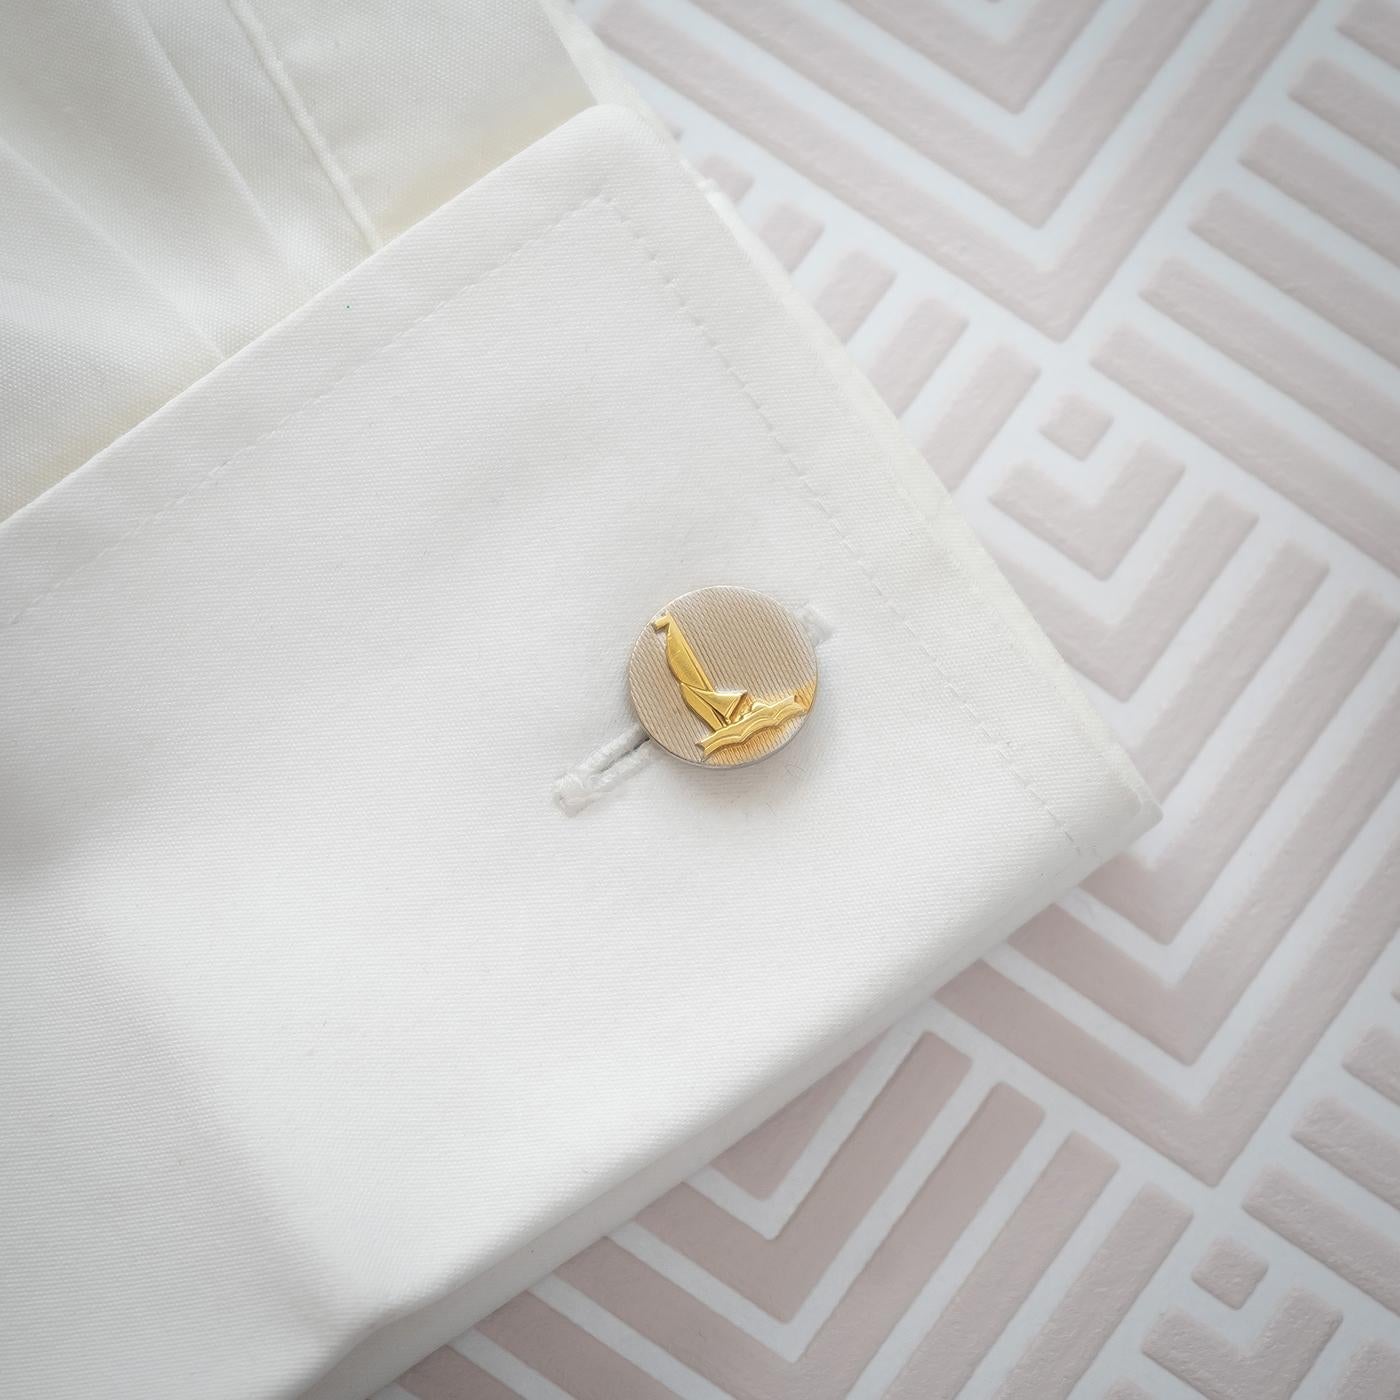 A pair of platinum cufflinks, comprising of a circular engine-turned platinum disc, with a gold plated sailing boat on each, with chain link fittings, circa 1950.